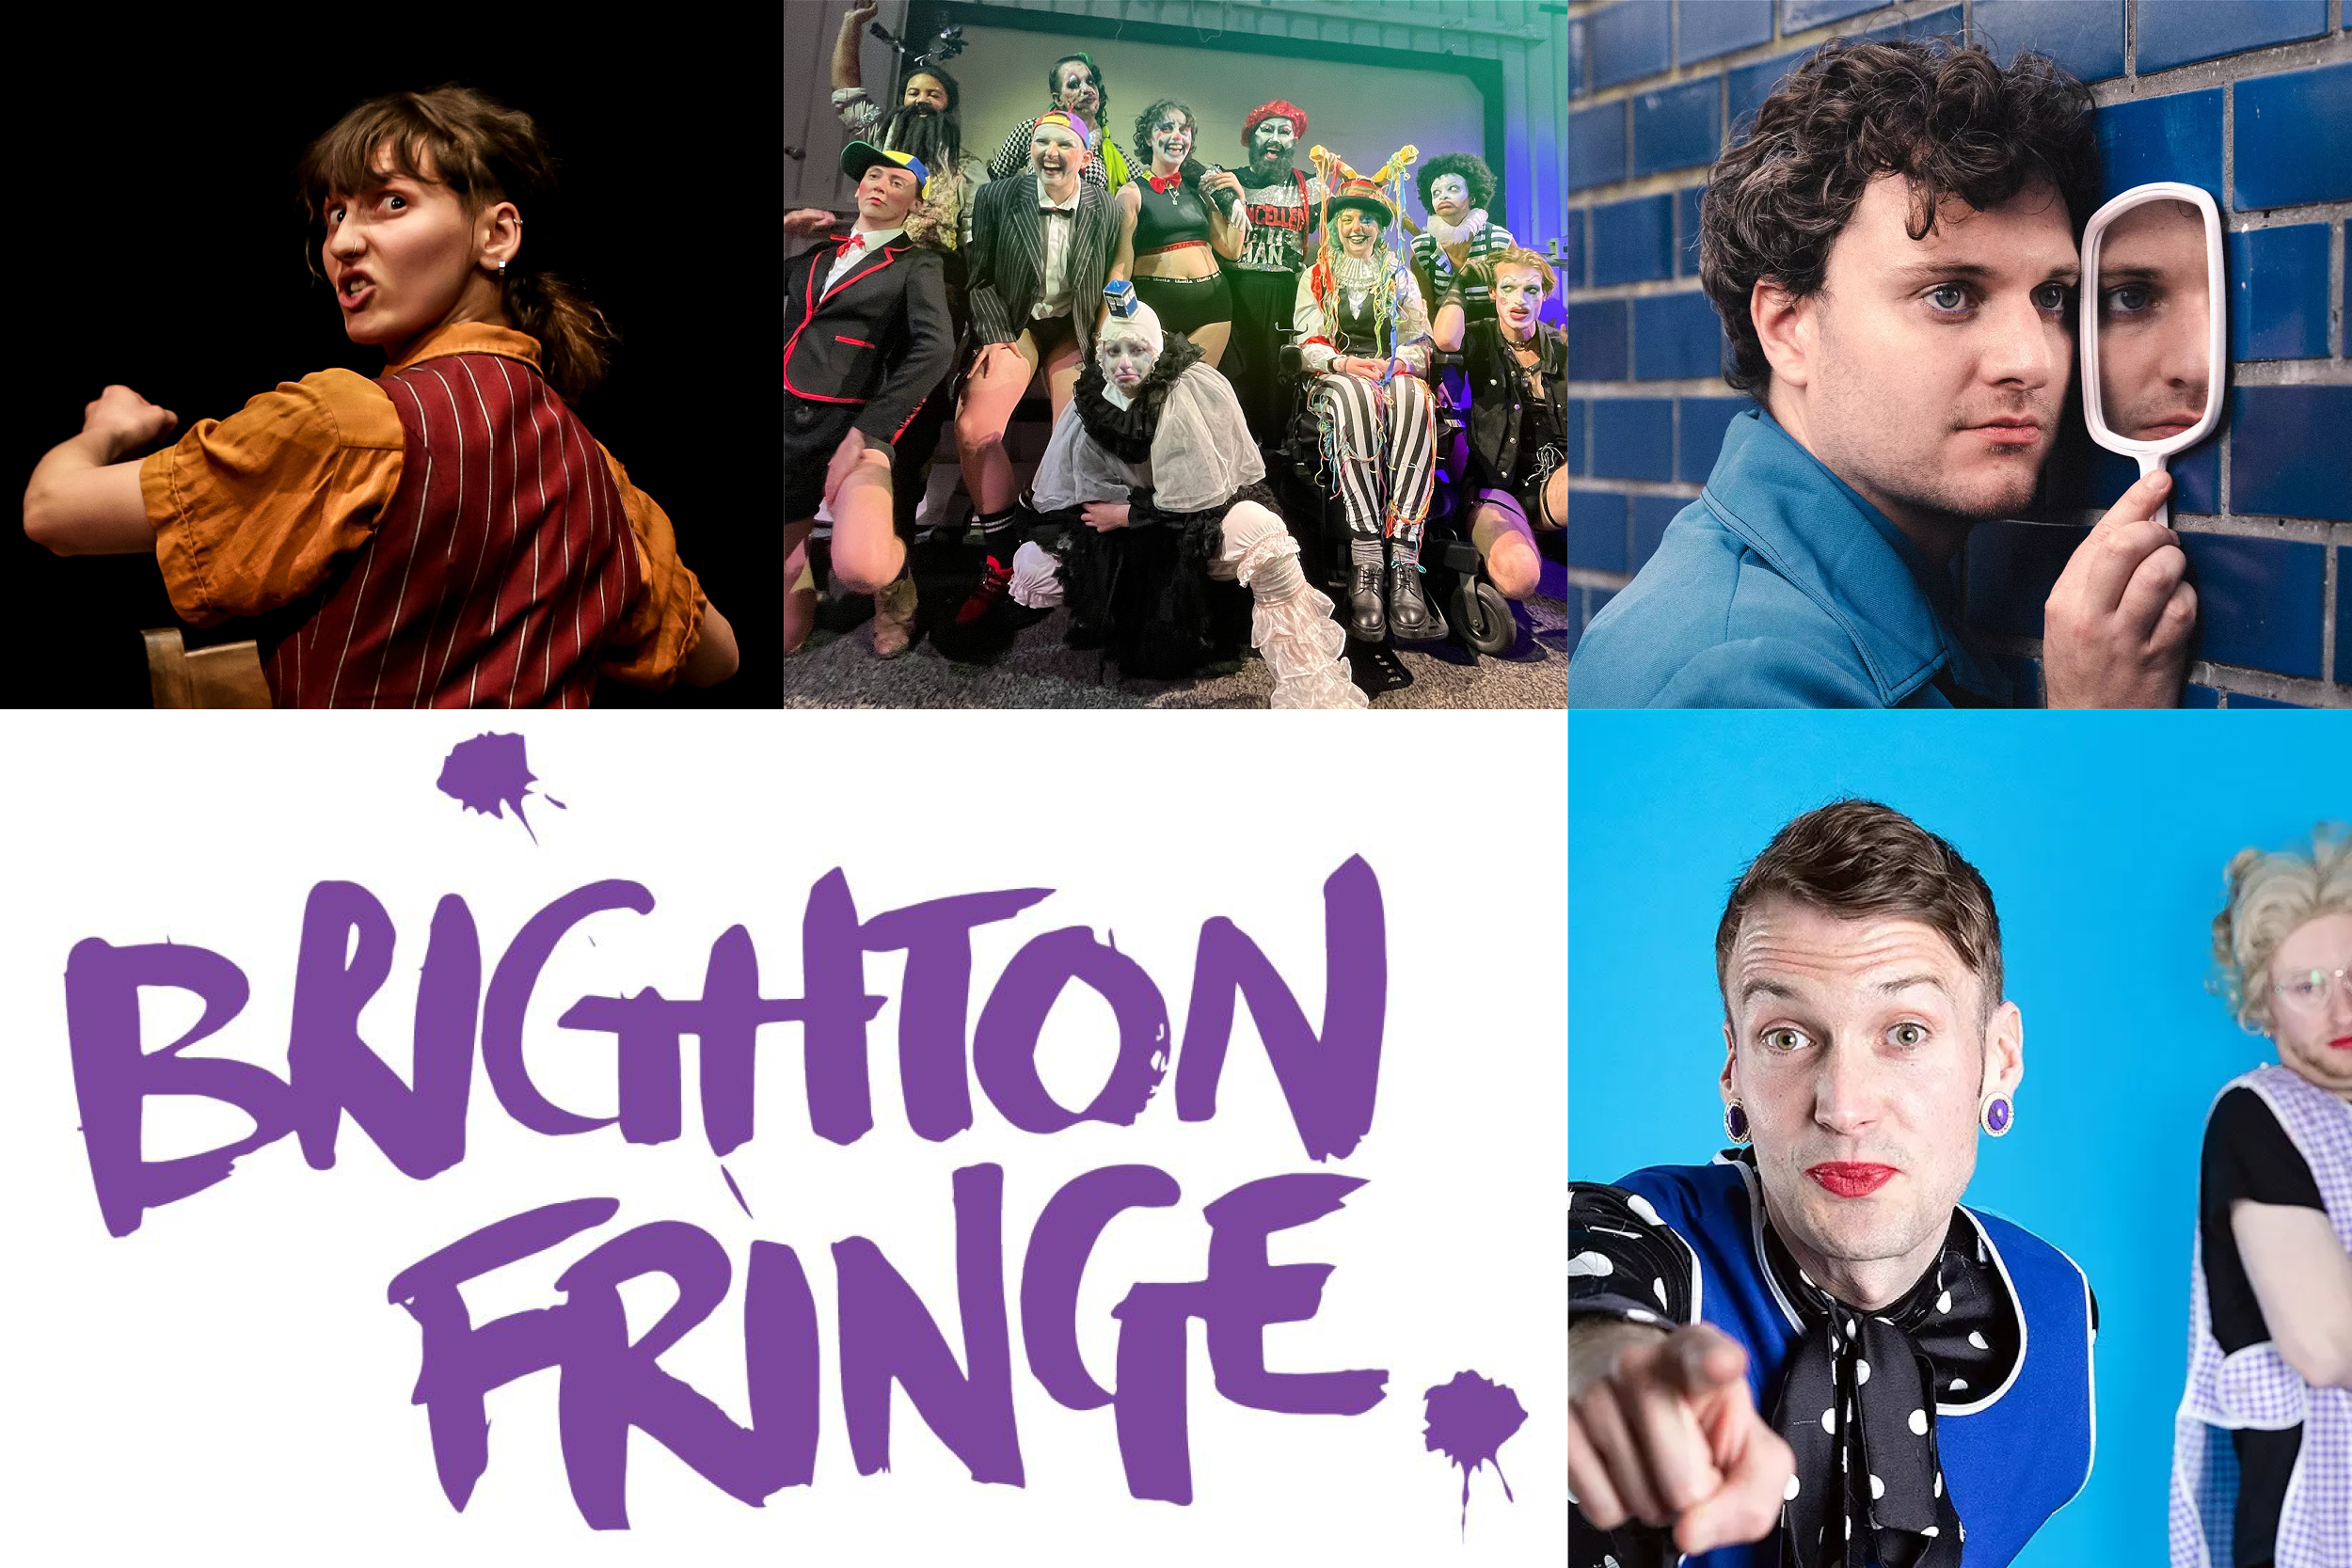 Clowns, a one-way mirror and the Cuban revolution – that’s Brighton Fringe for you